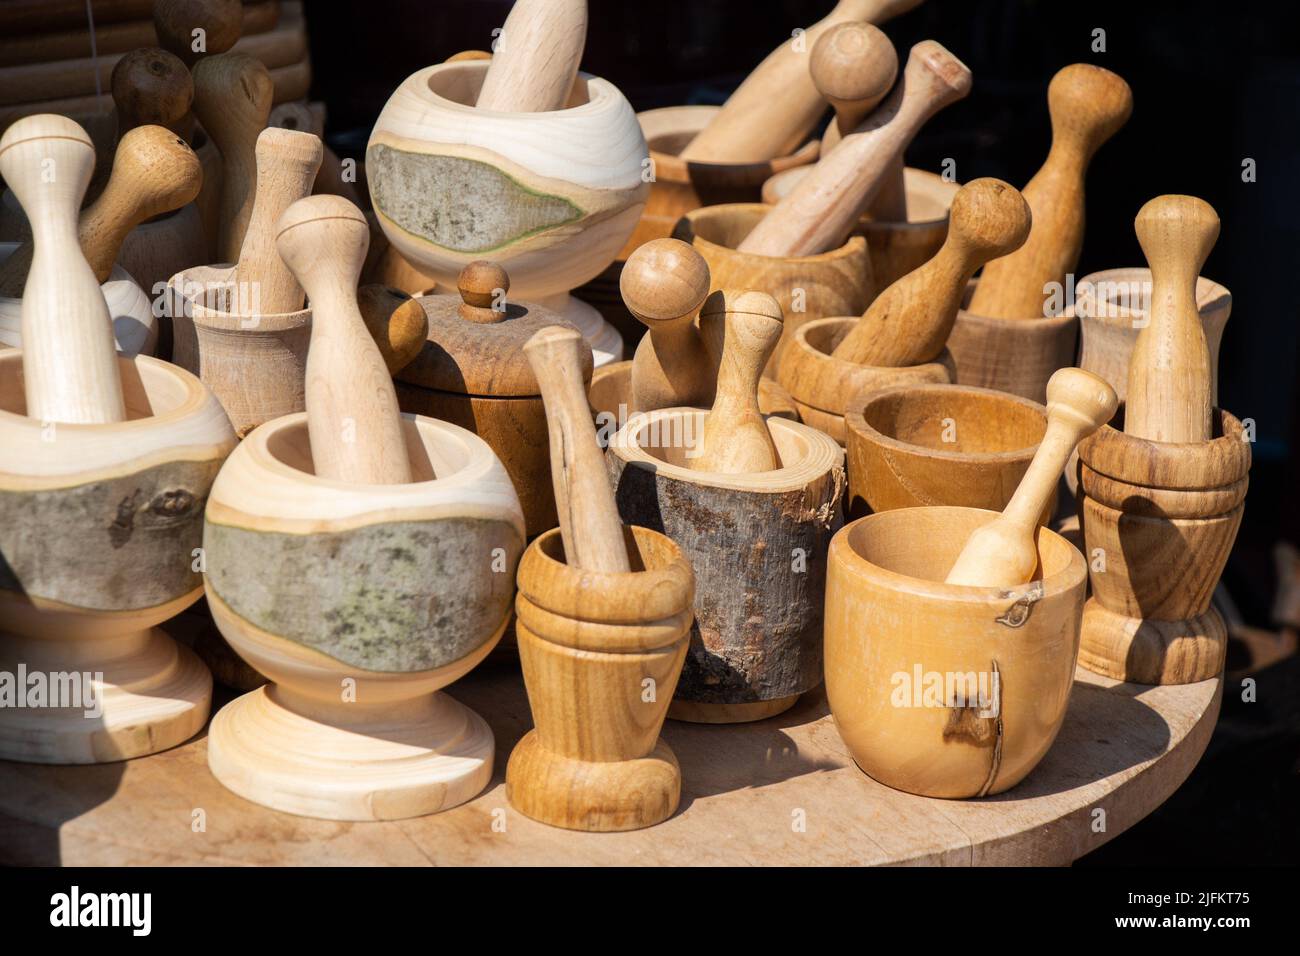 wooden mortars and pestles as a traditional kitchenware. Stock Photo